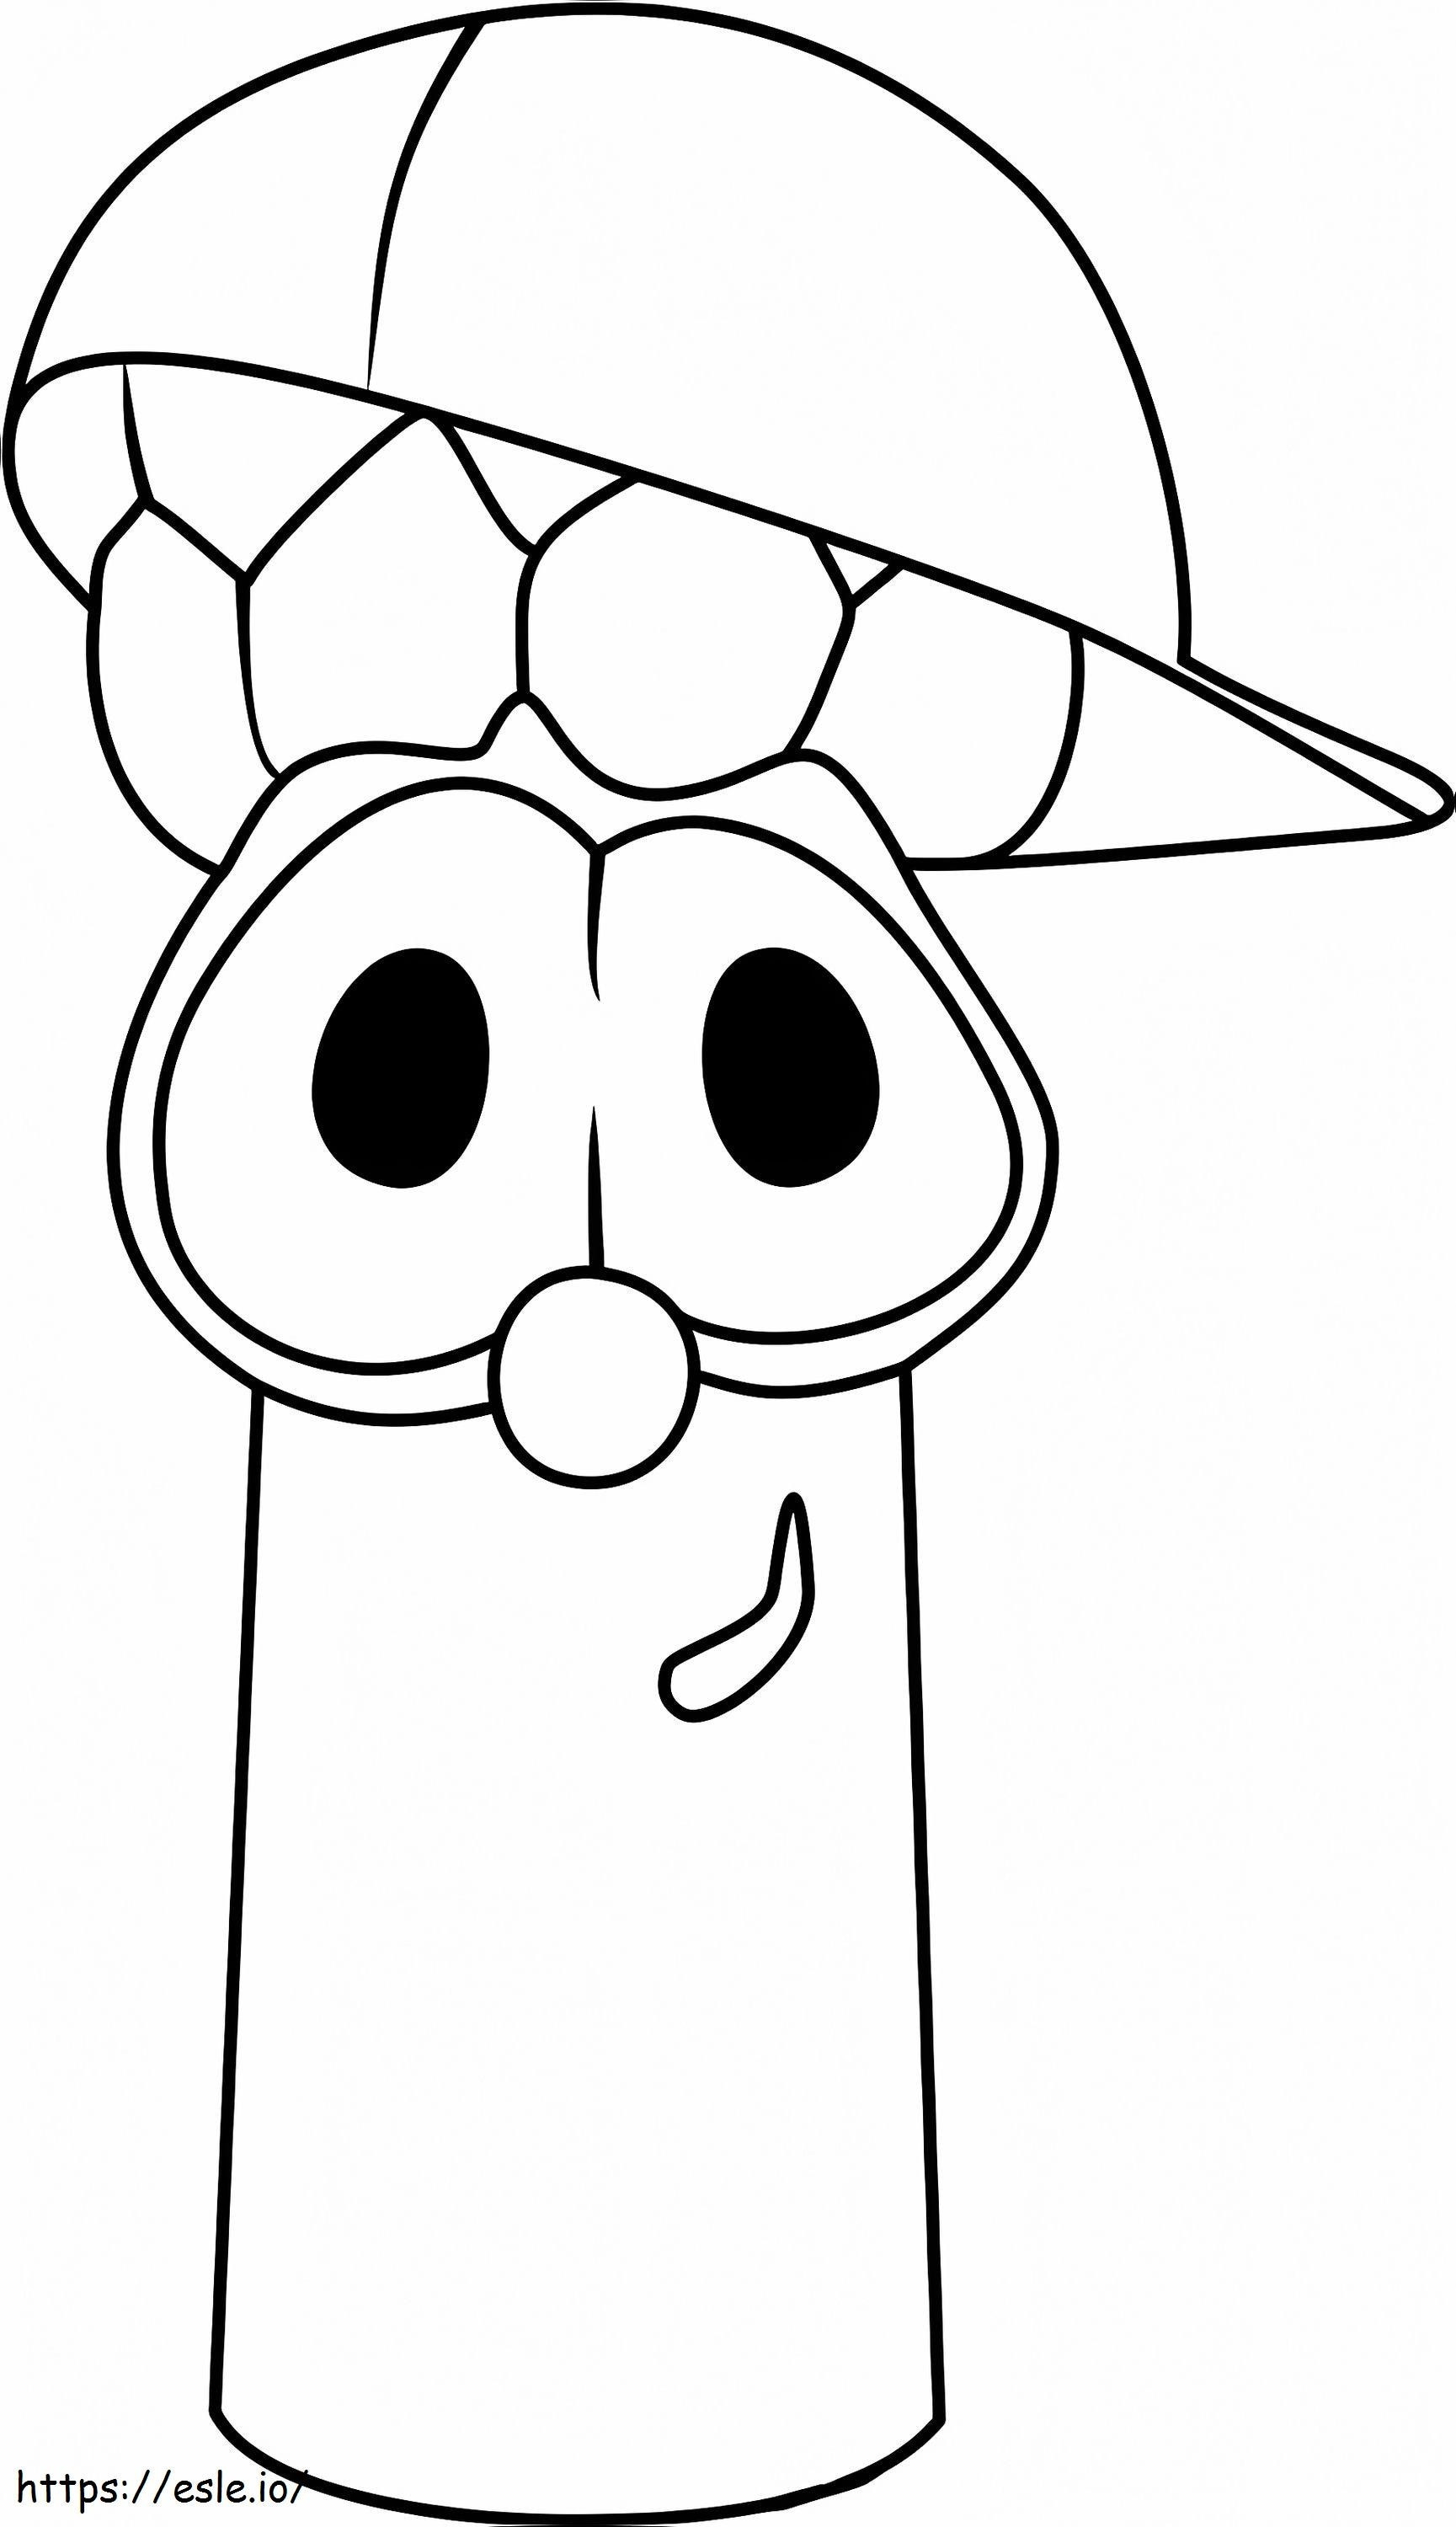 1531364579 Cool Junior Asparagus A4 coloring page